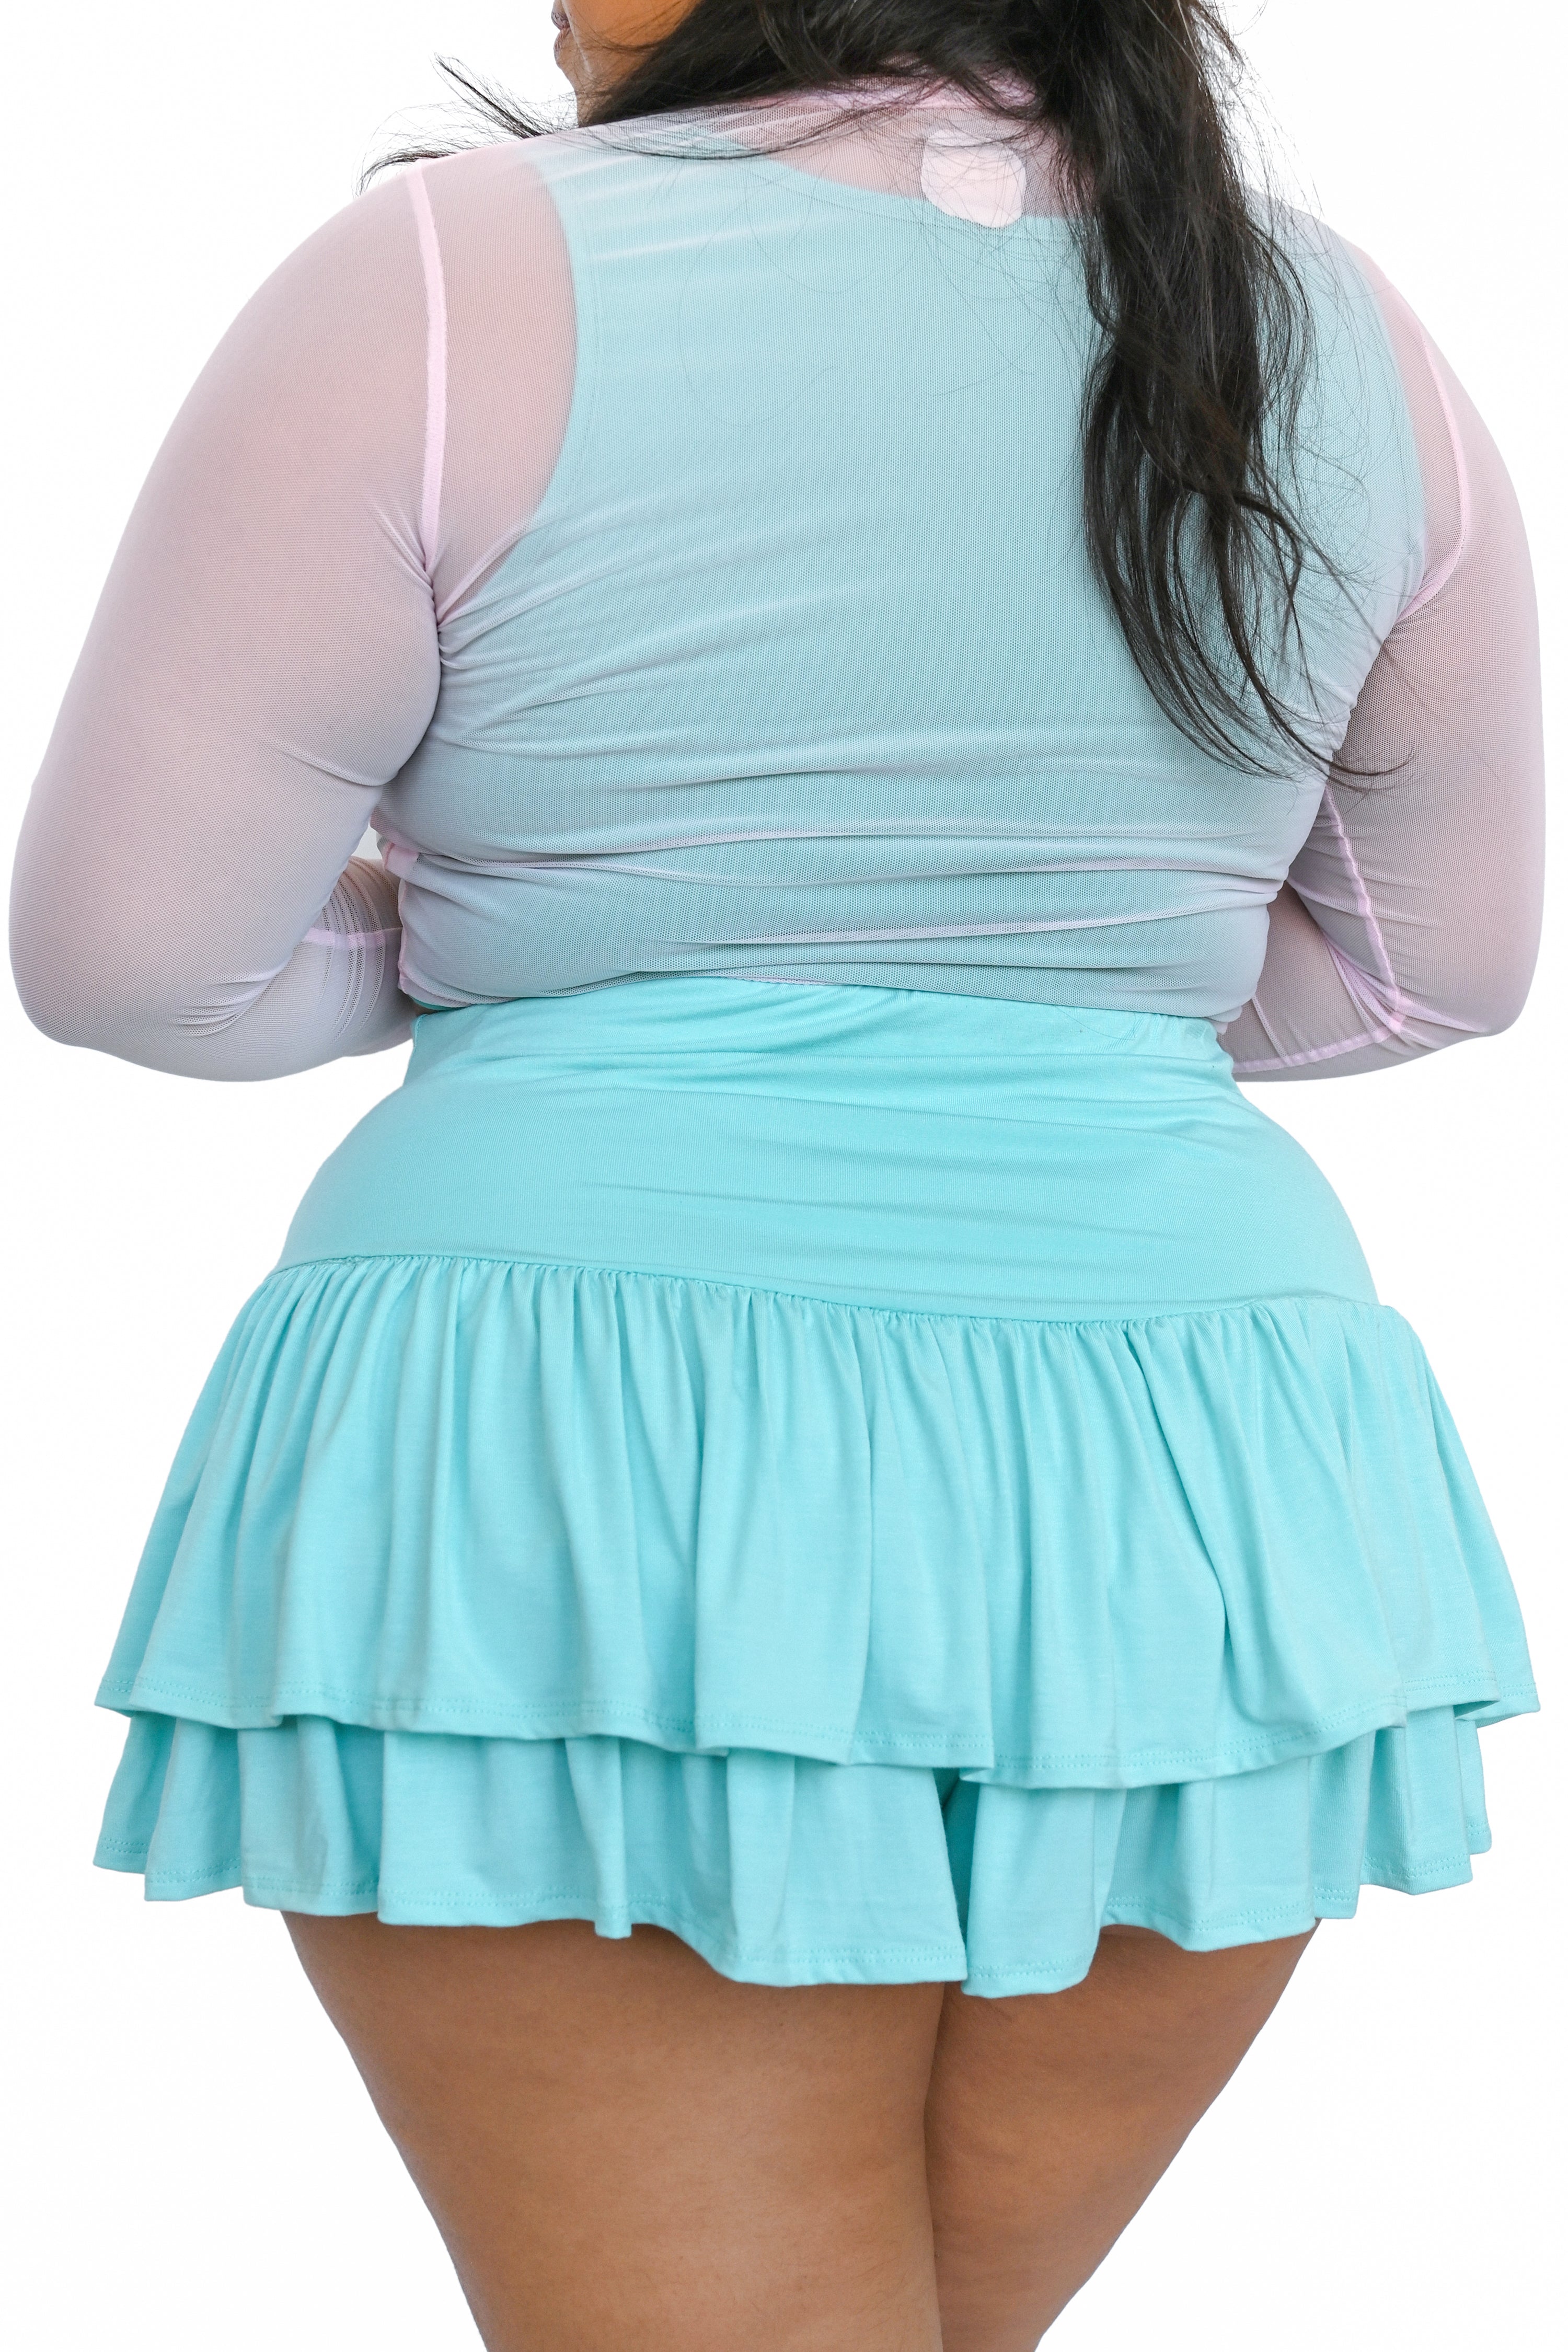 ruffle shorts with a layer to make them look like a skirt! in aqua blue